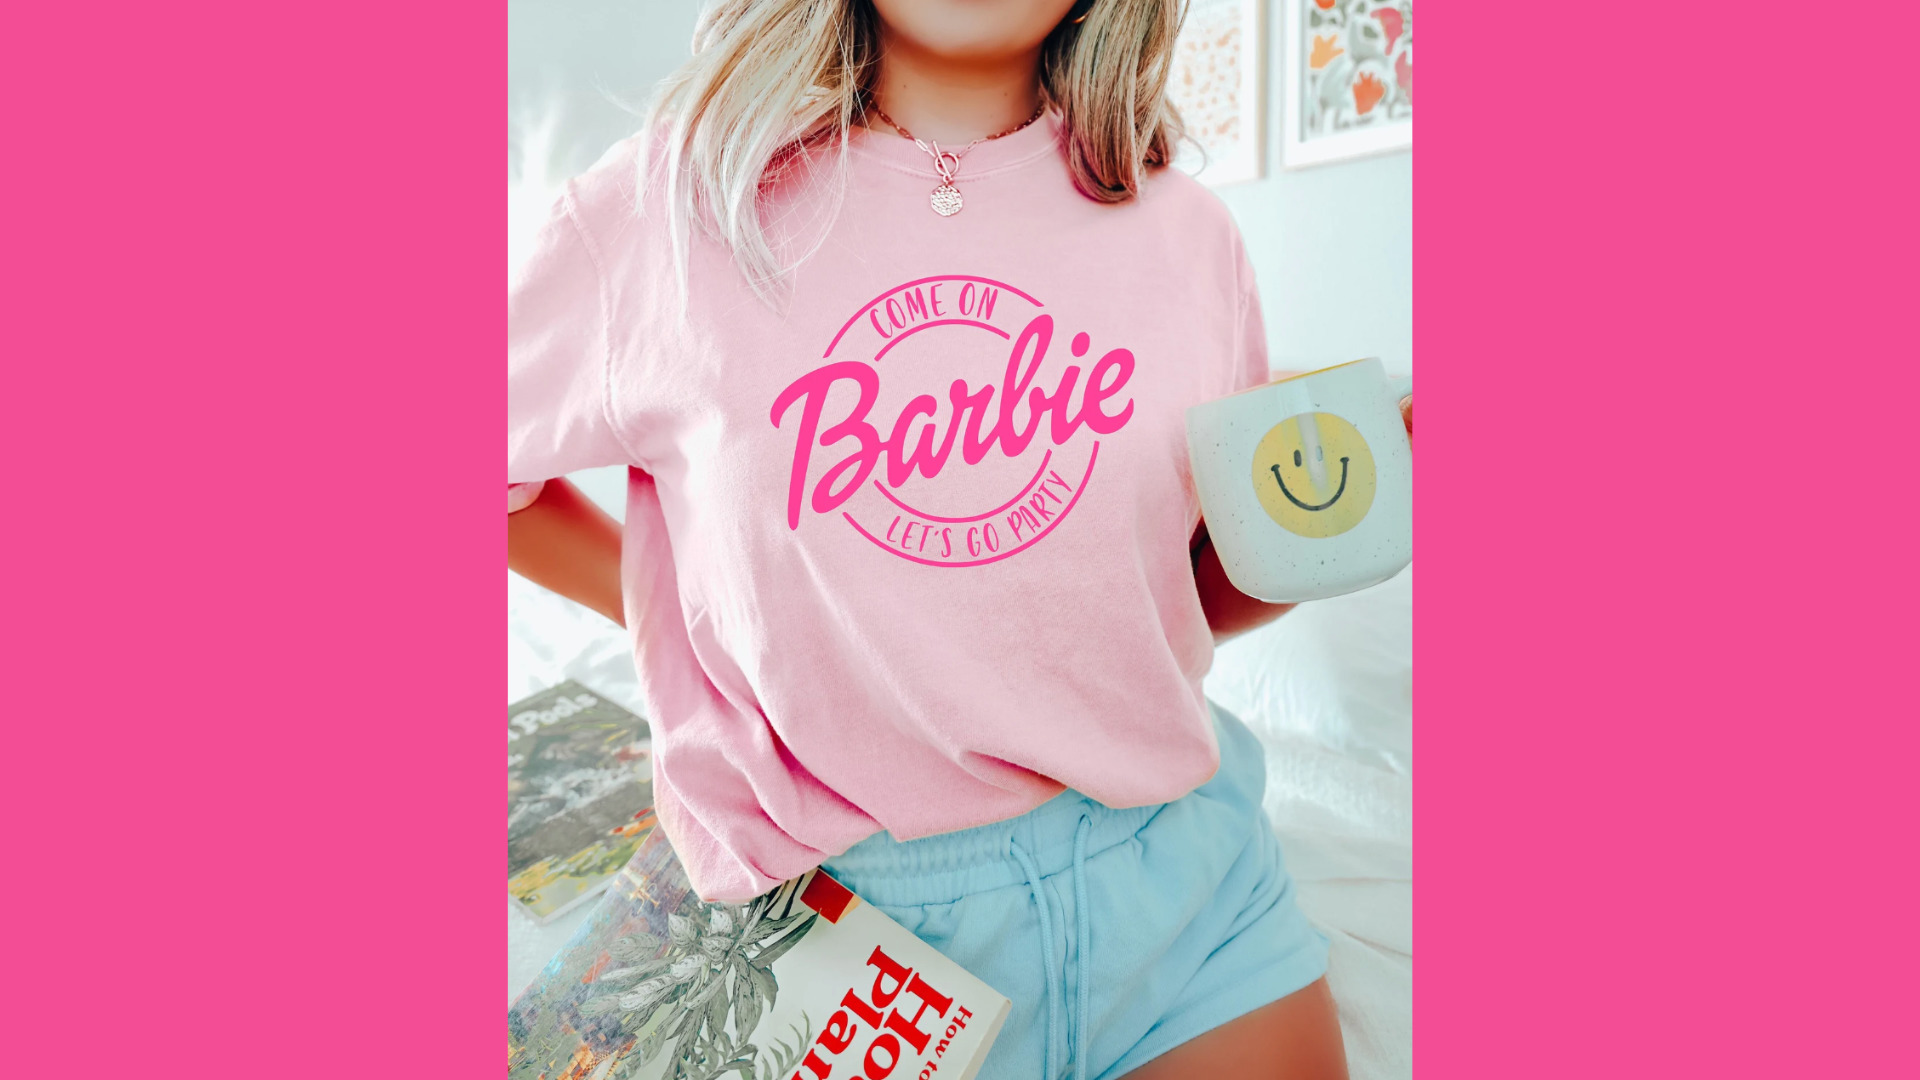 Come on, Barbie, let's go party tshirt for Barbie movie gift